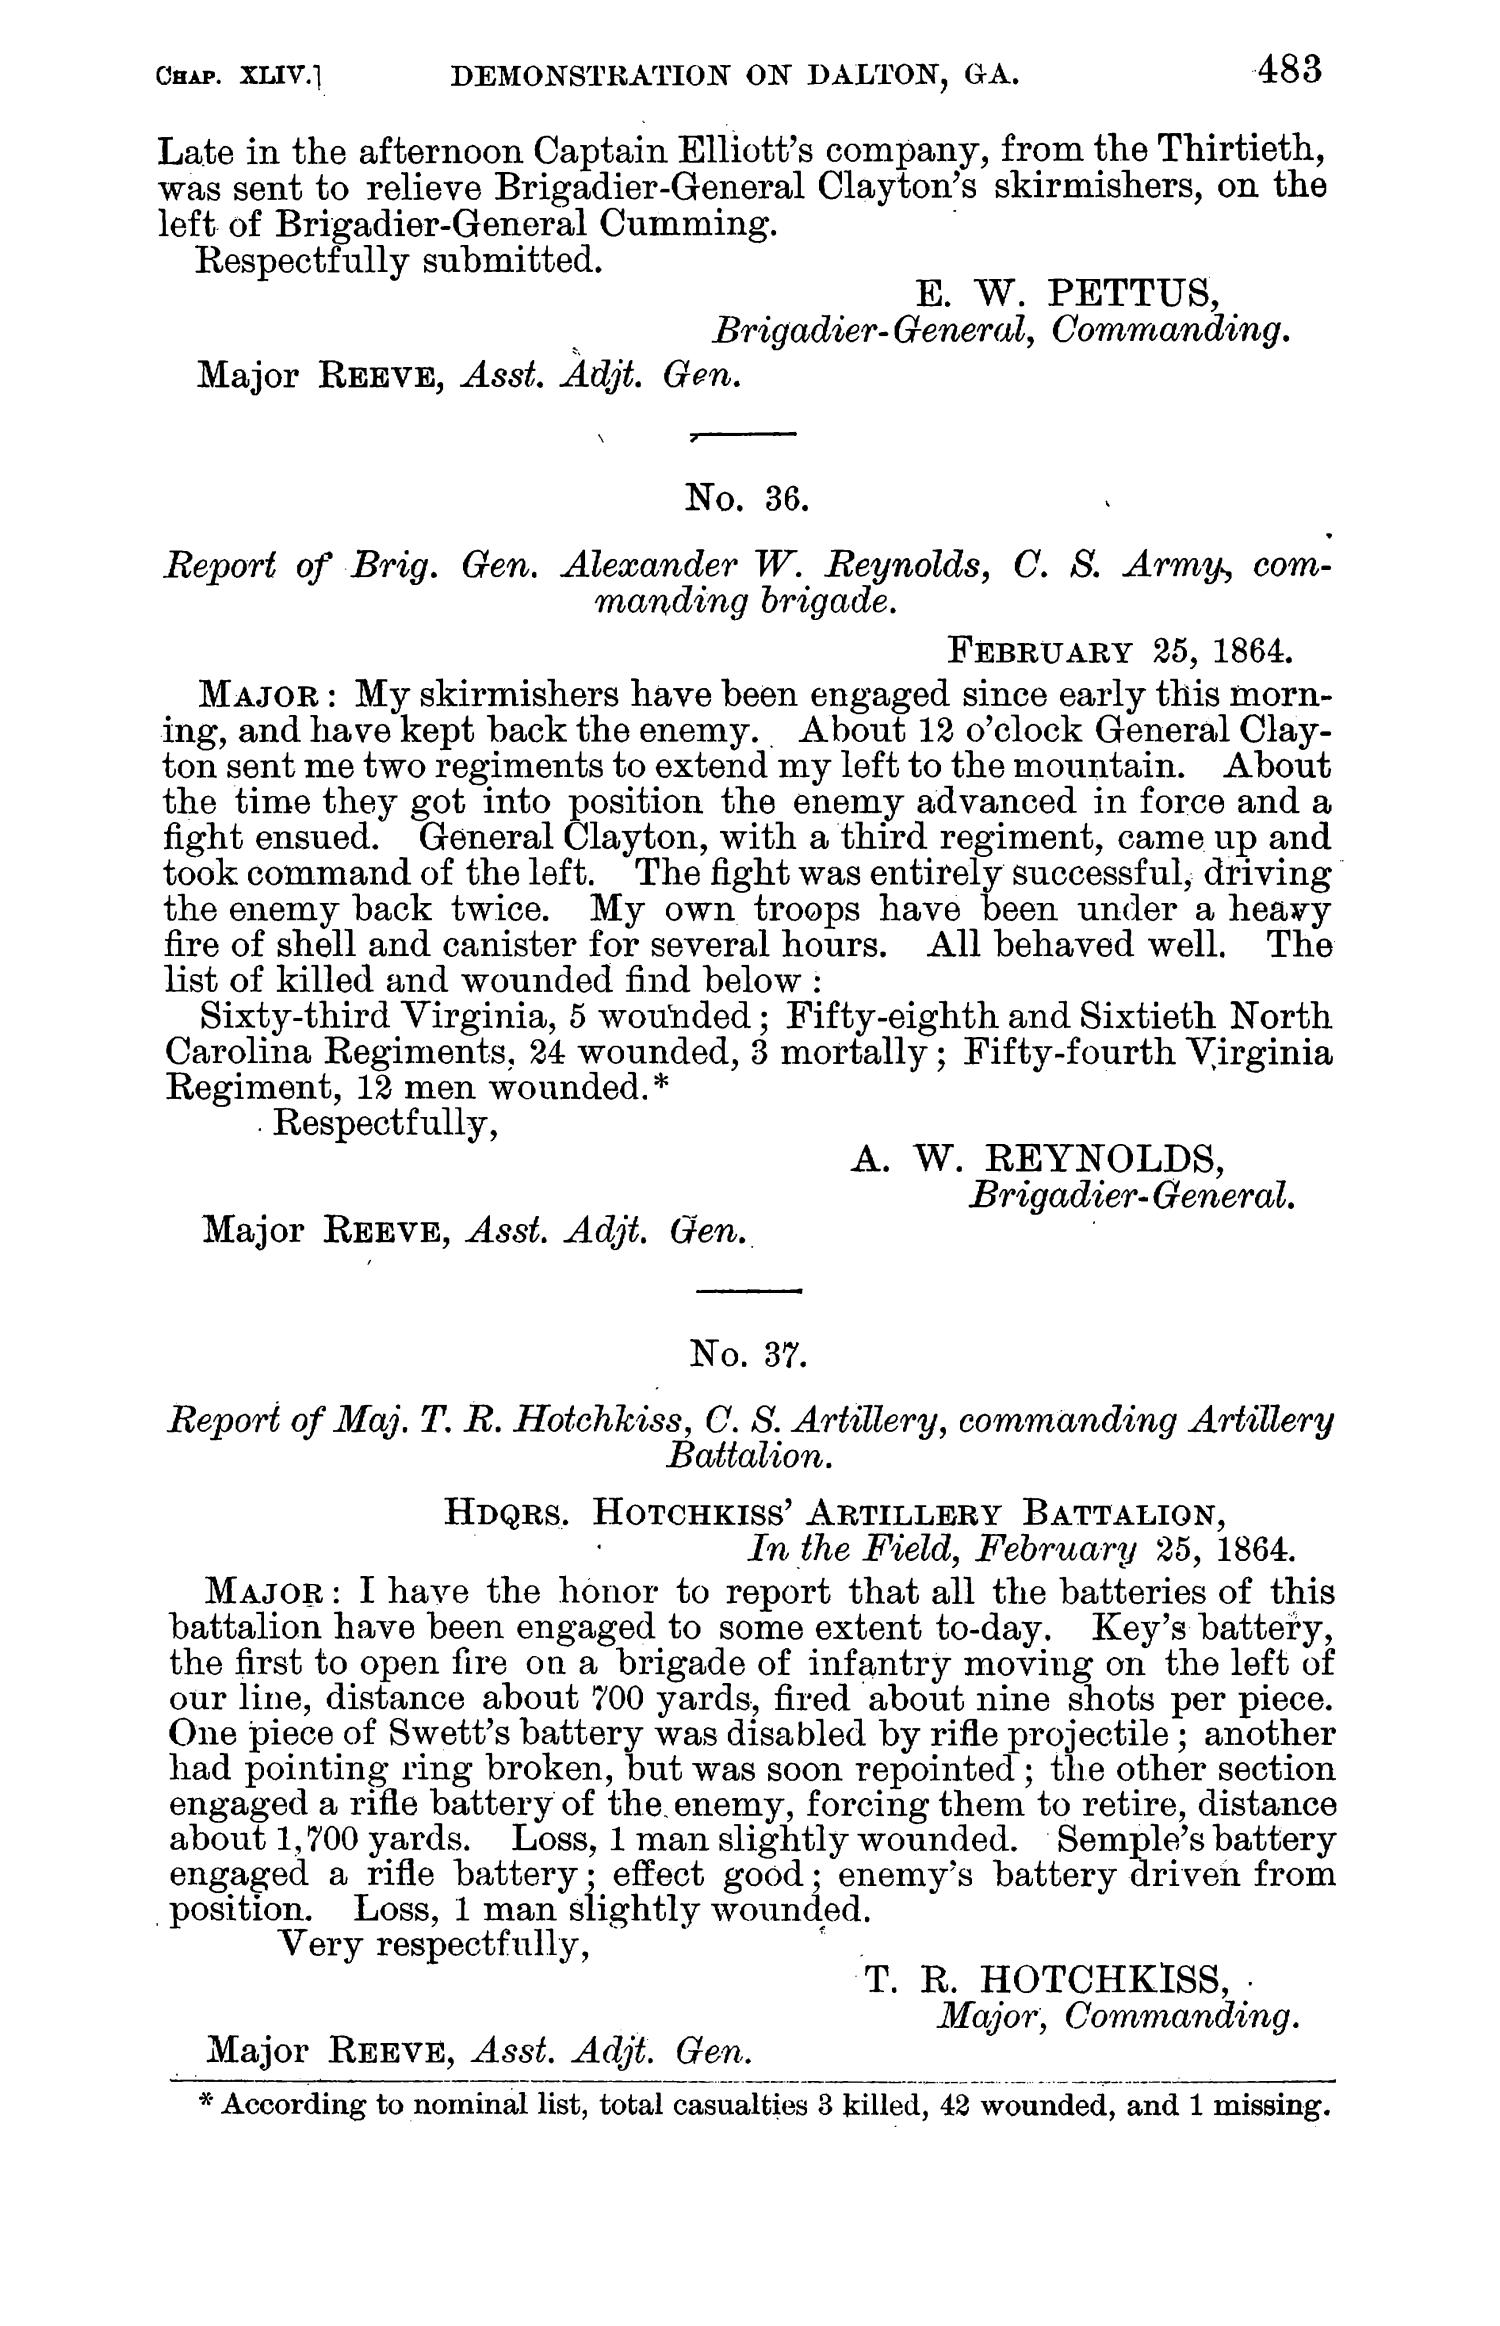 The War of the Rebellion: A Compilation of the Official Records of the Union And Confederate Armies. Series 1, Volume 32, In Three Parts. Part 1, Reports.
                                                
                                                    483
                                                